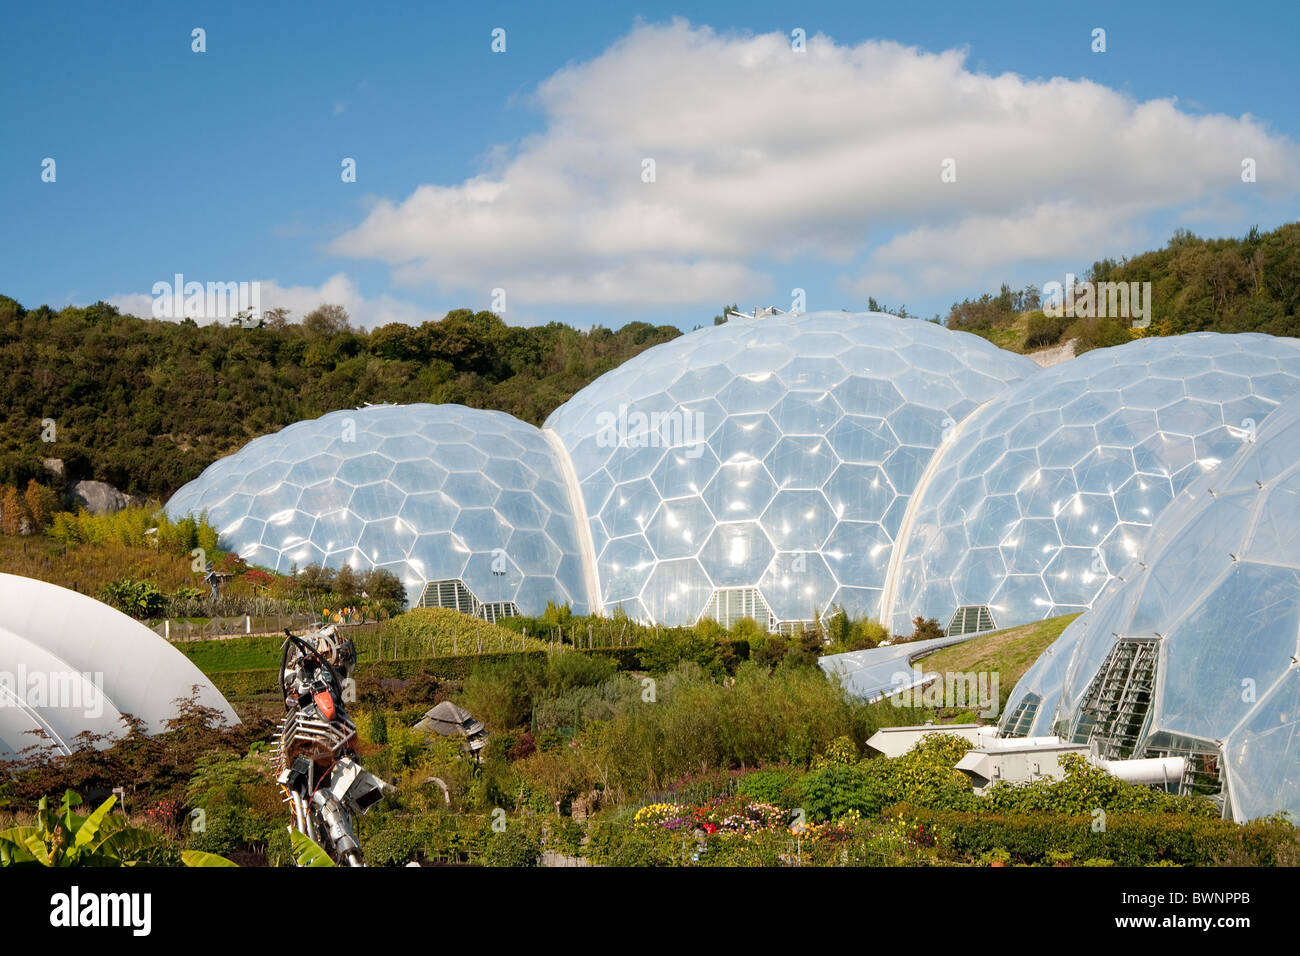 Exterior view of the Eden Project Biomes , Cornwall, England, UK Stock Photo